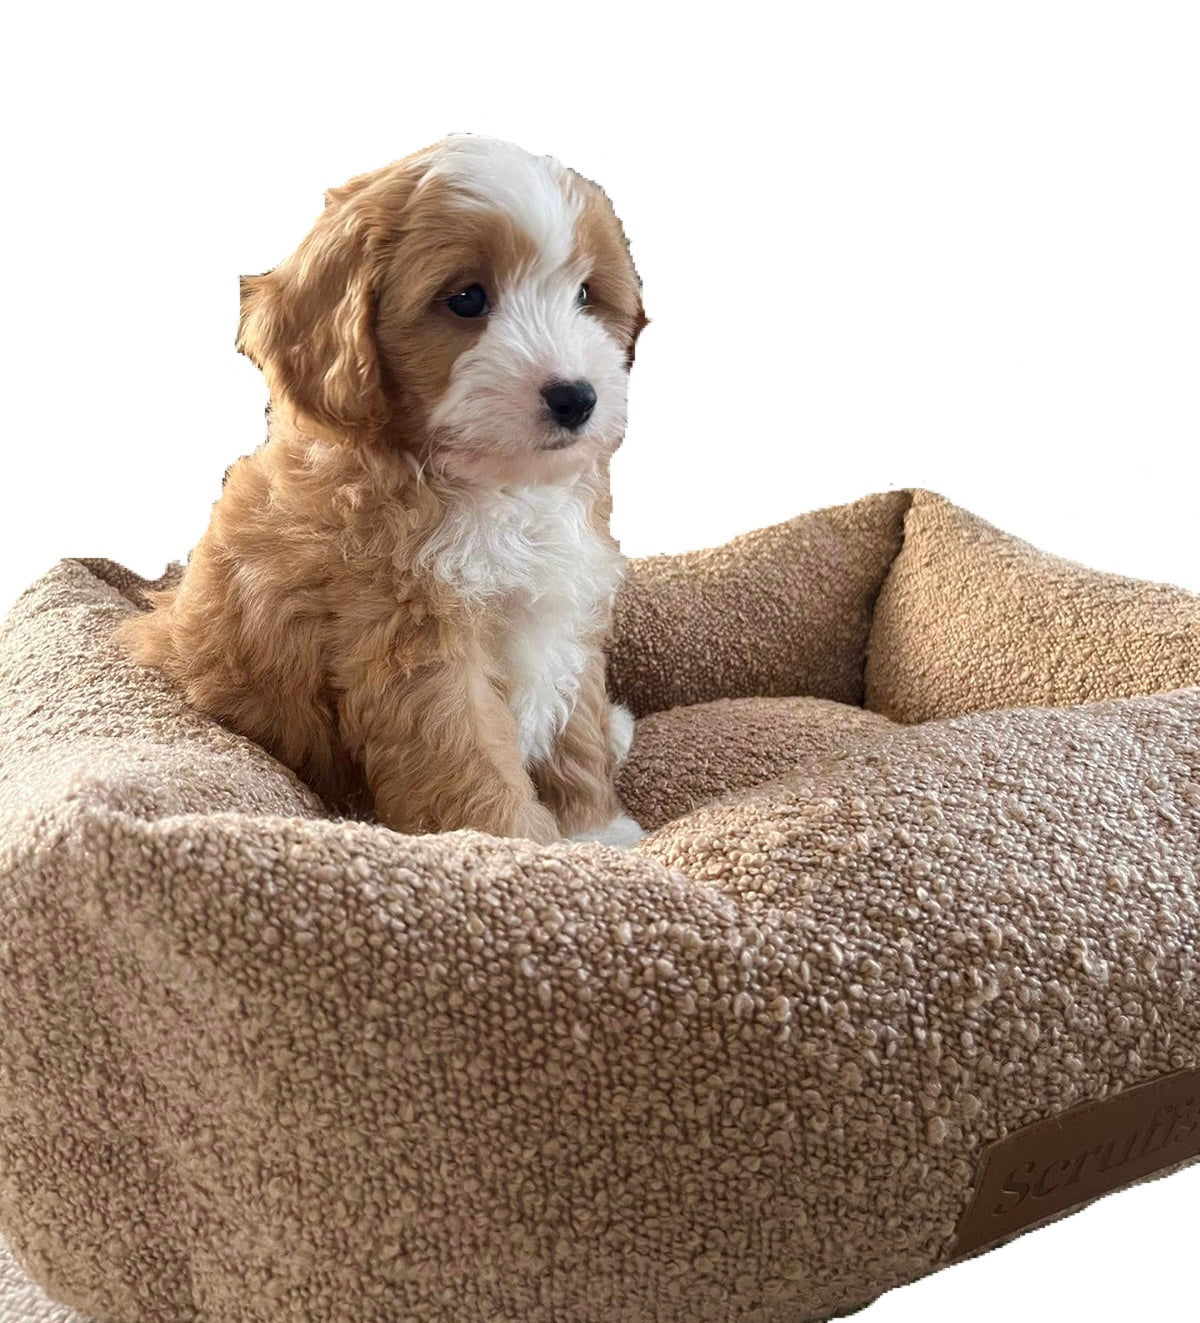 Boucle Box Puppy Bed DESERT TAN 50x40cm SMALL PUPPY Free Shipping!